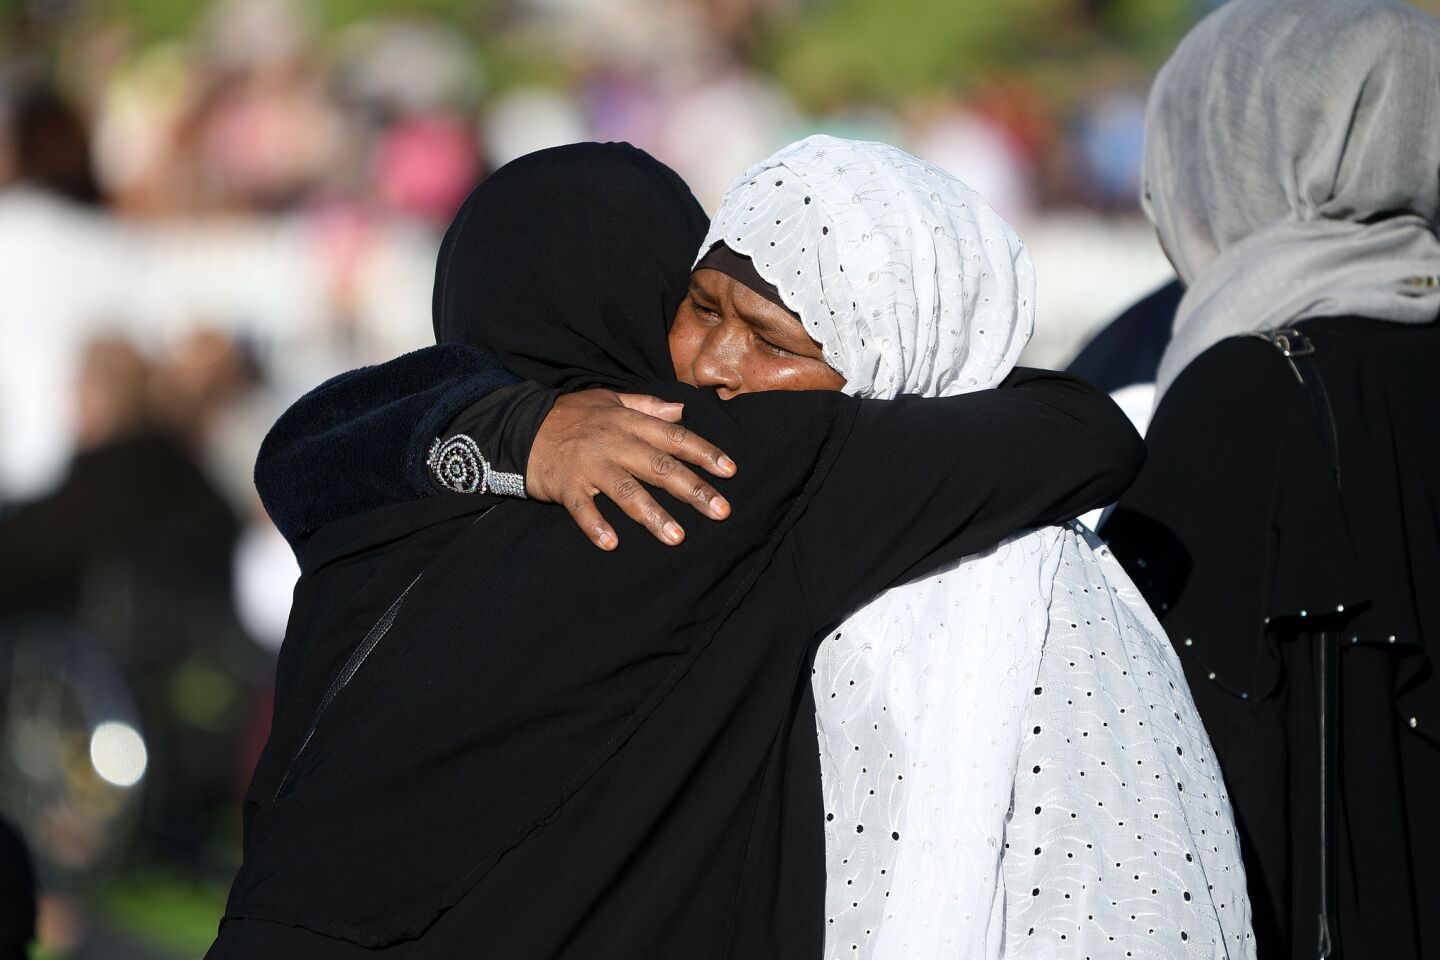 Mourners embrace at a vigil Sunday at the Basin Reserve in Wellington, New Zealand.